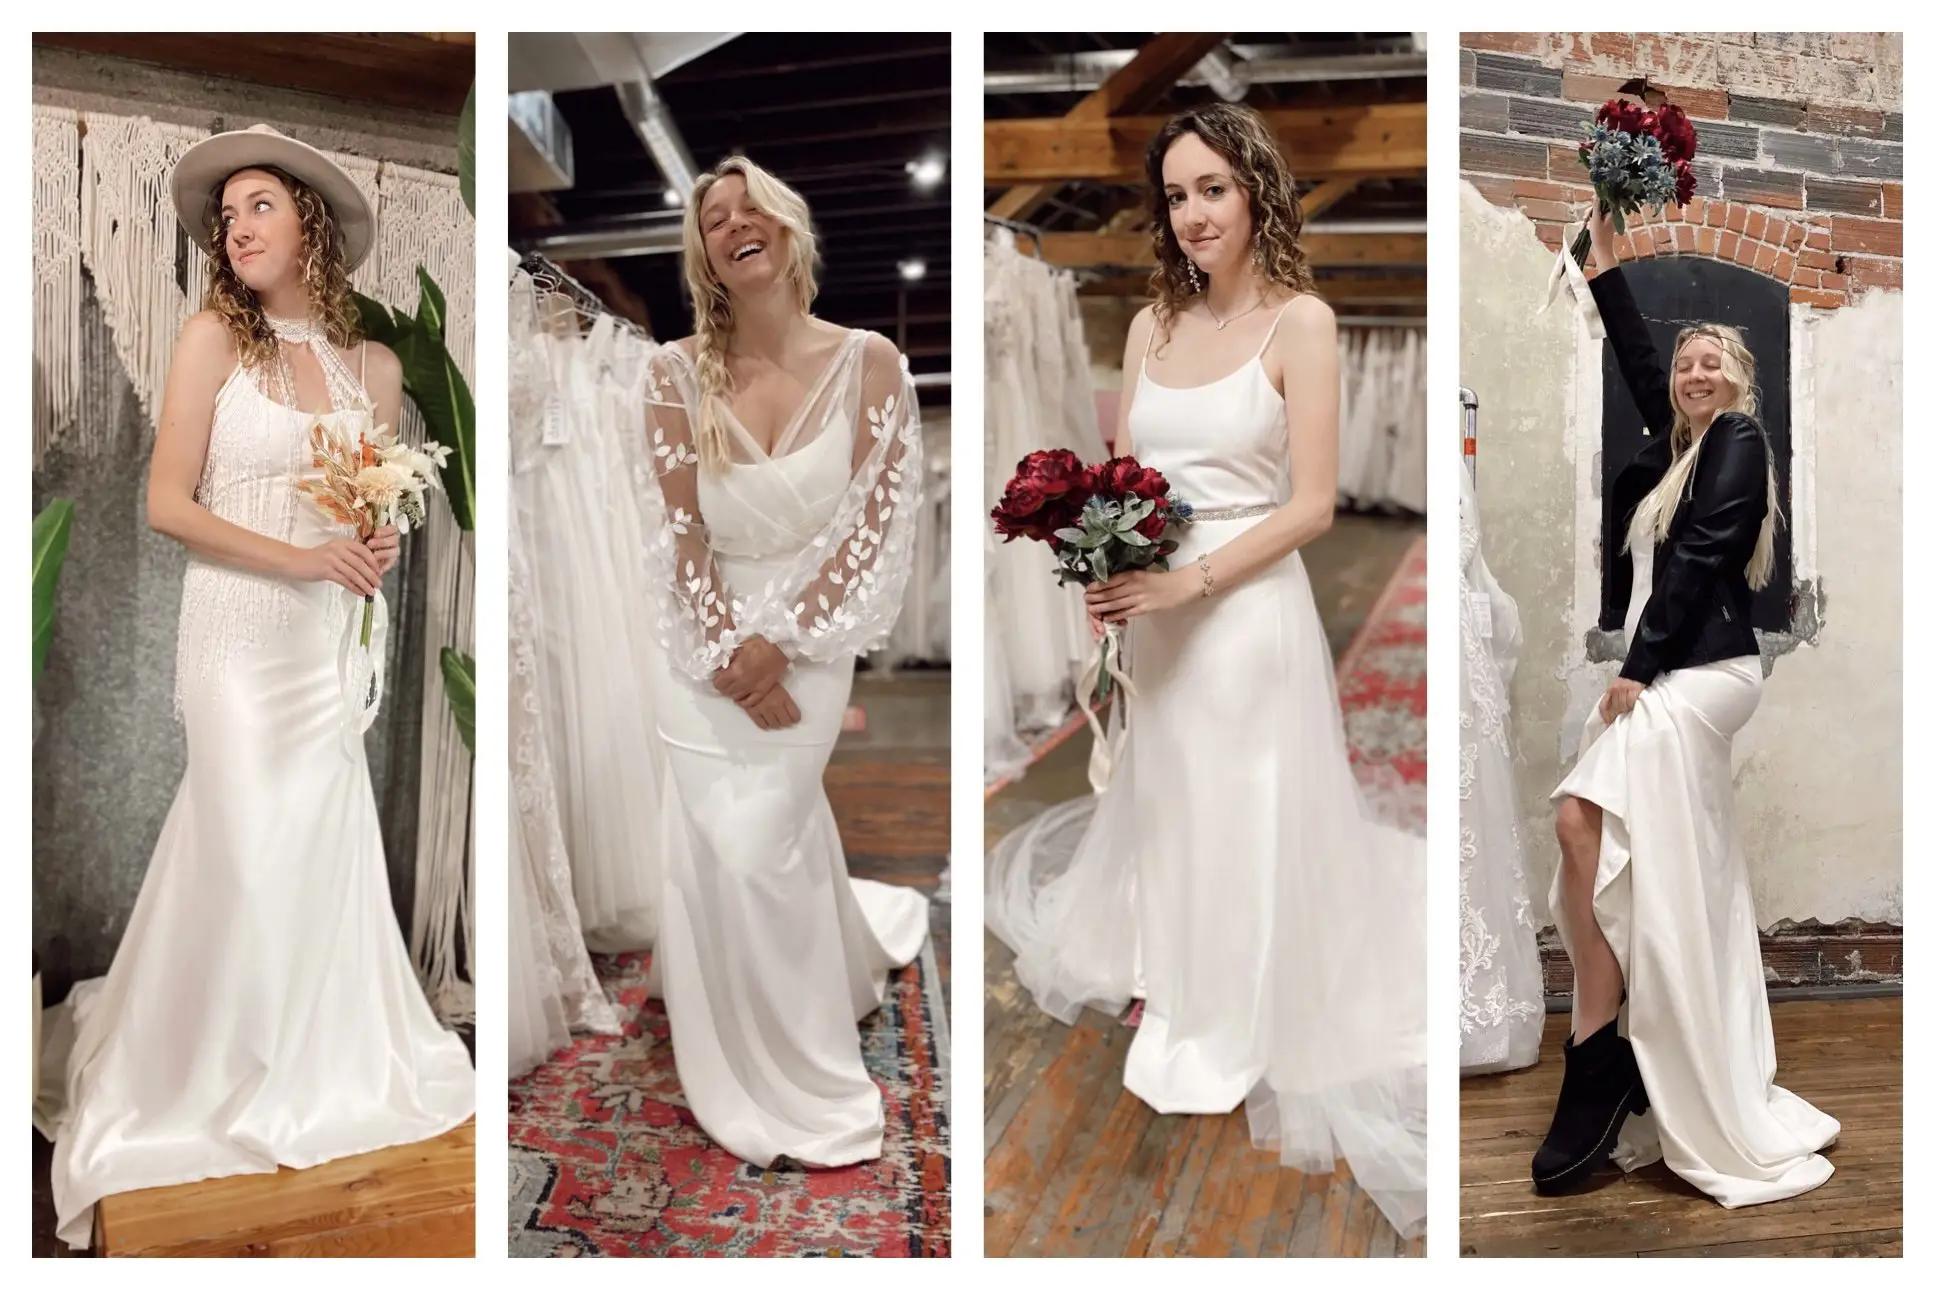 Our Primrose Gown, Styled 4 Different Ways. Desktop Image